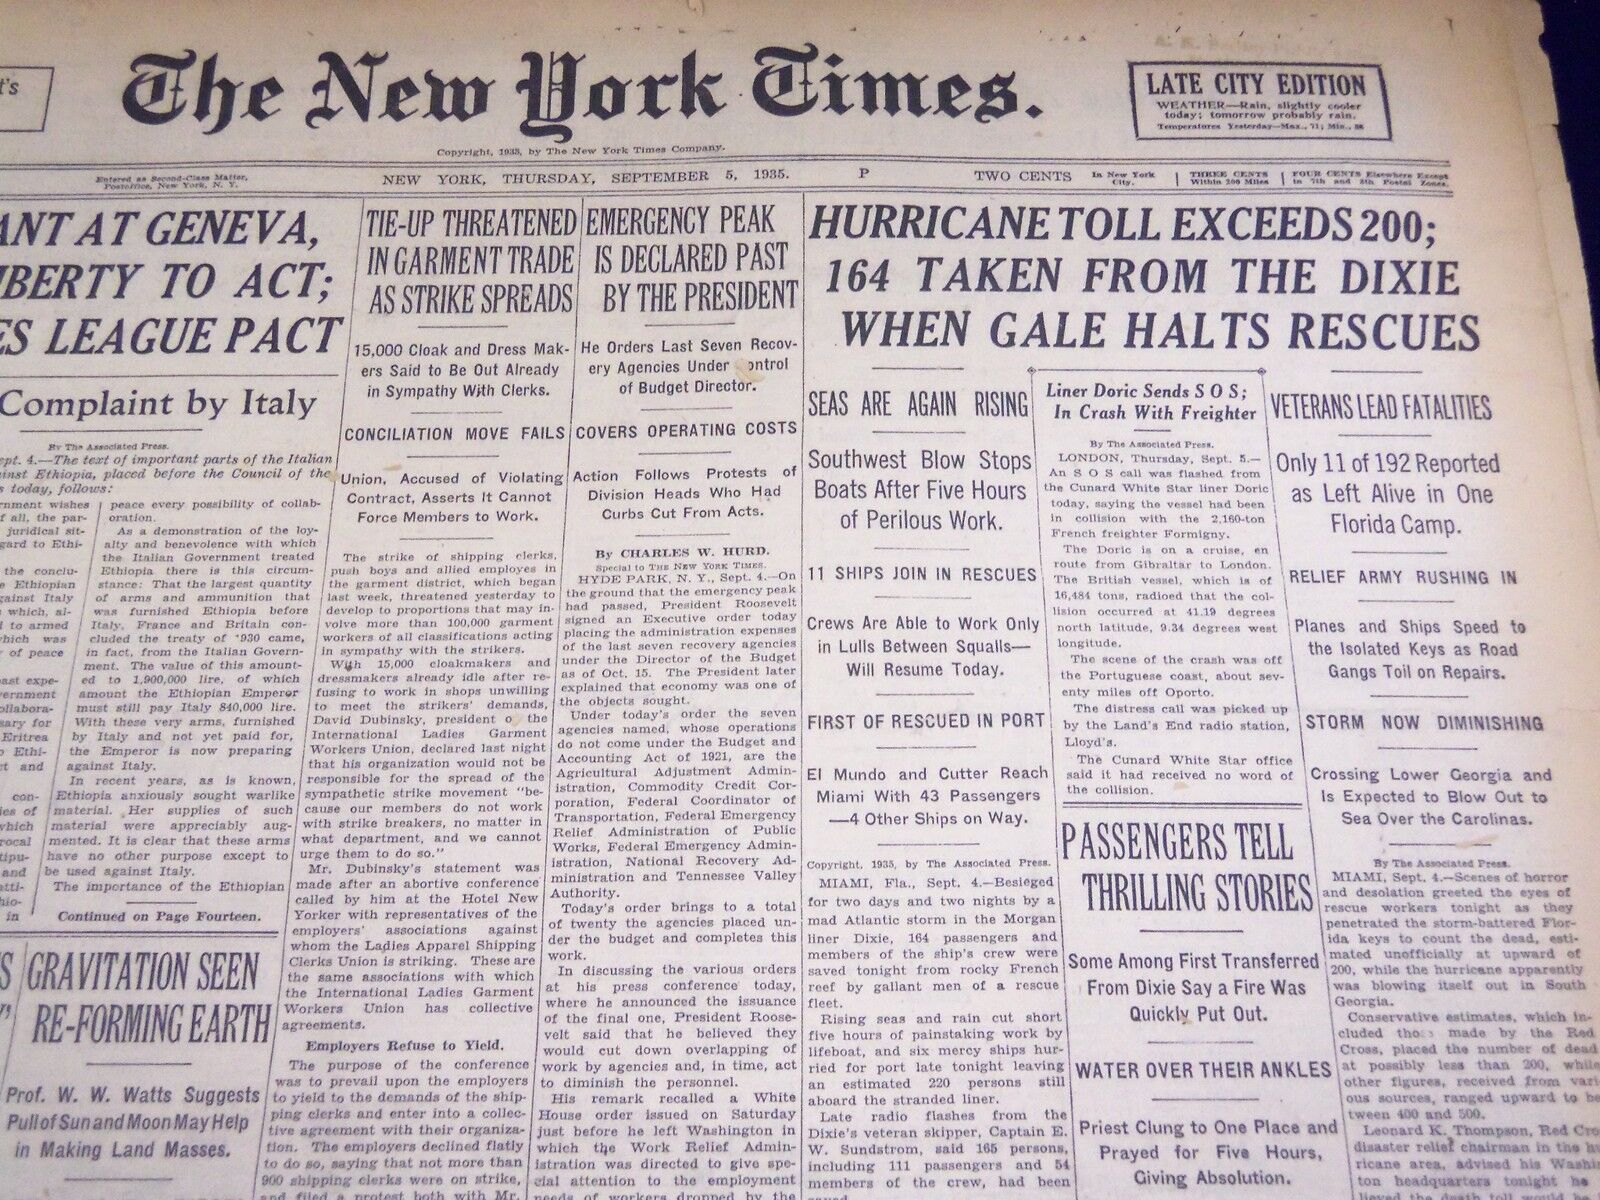 1935 SEPT 5 NEW YORK TIMES - HURRICANE TOLL EXCEEDS 200 - DIXIE SAFE - NT 1978